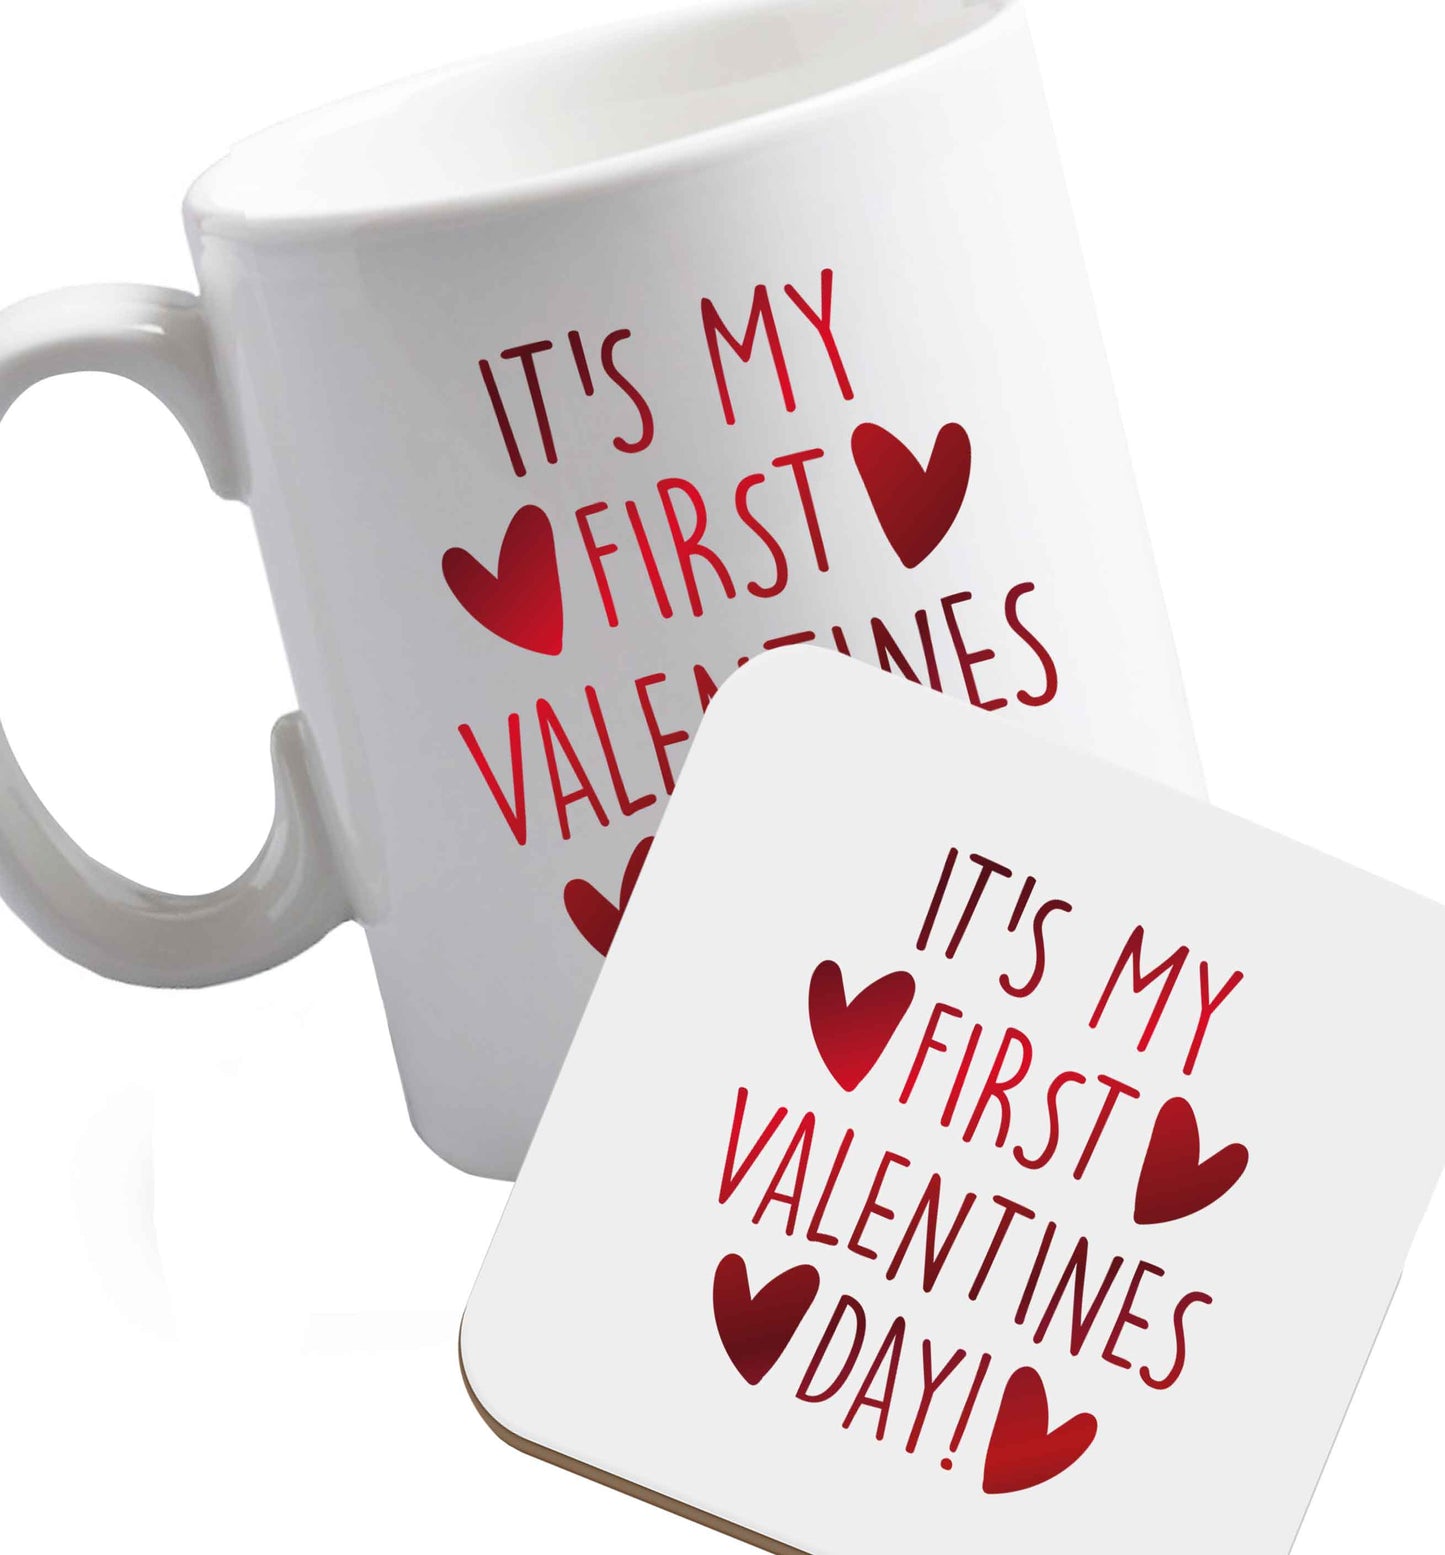 10 oz It's my first valentines day! ceramic mug and coaster set right handed